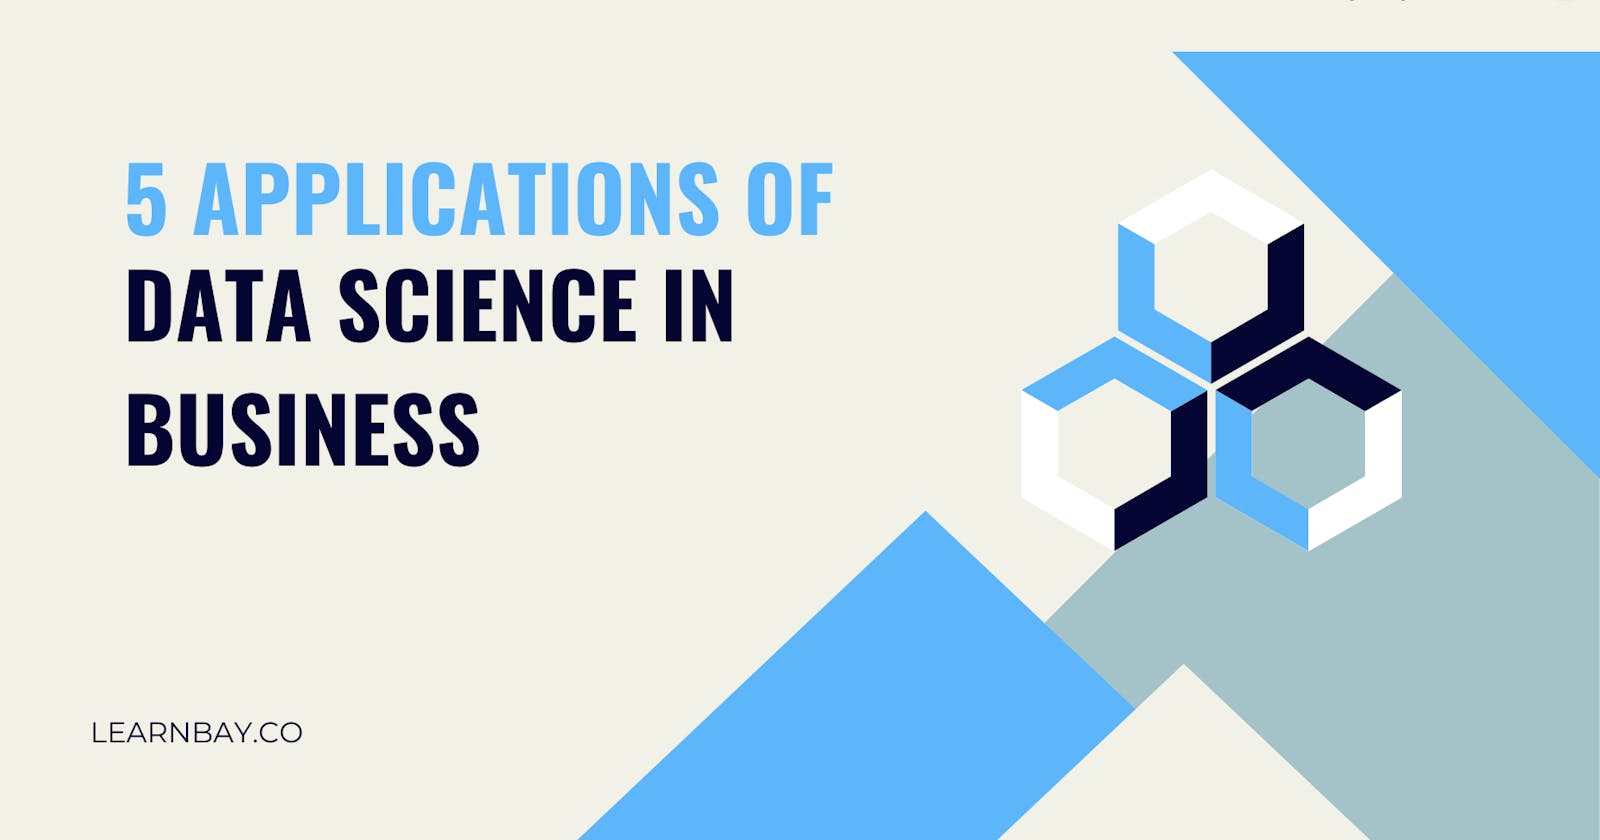 5 Applications of Data Science in Business